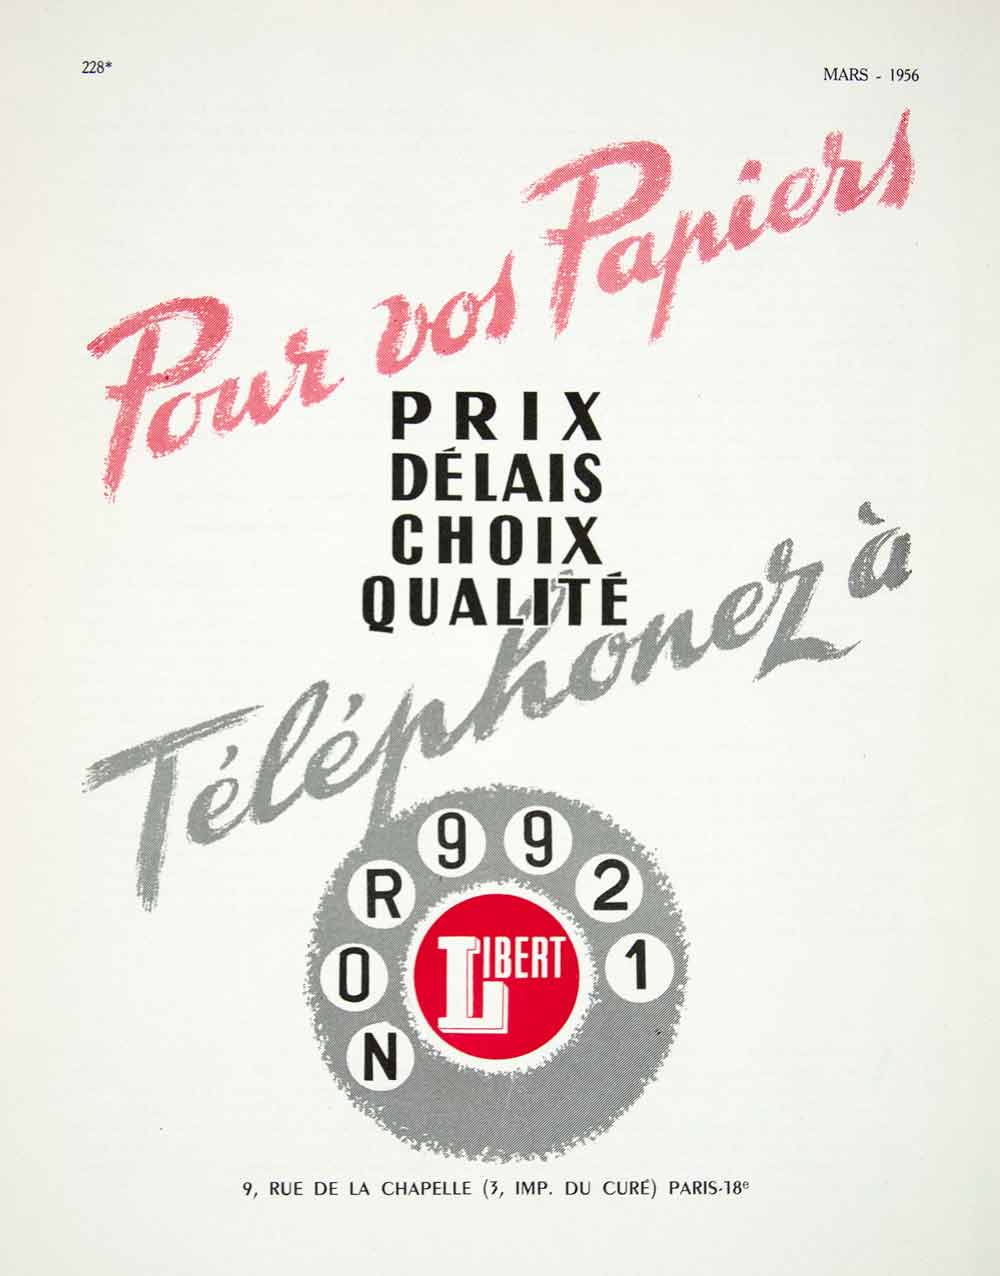 1956 Ad Telephonez French Advertising Papiers Rotary Libert NOR9921 VEN6